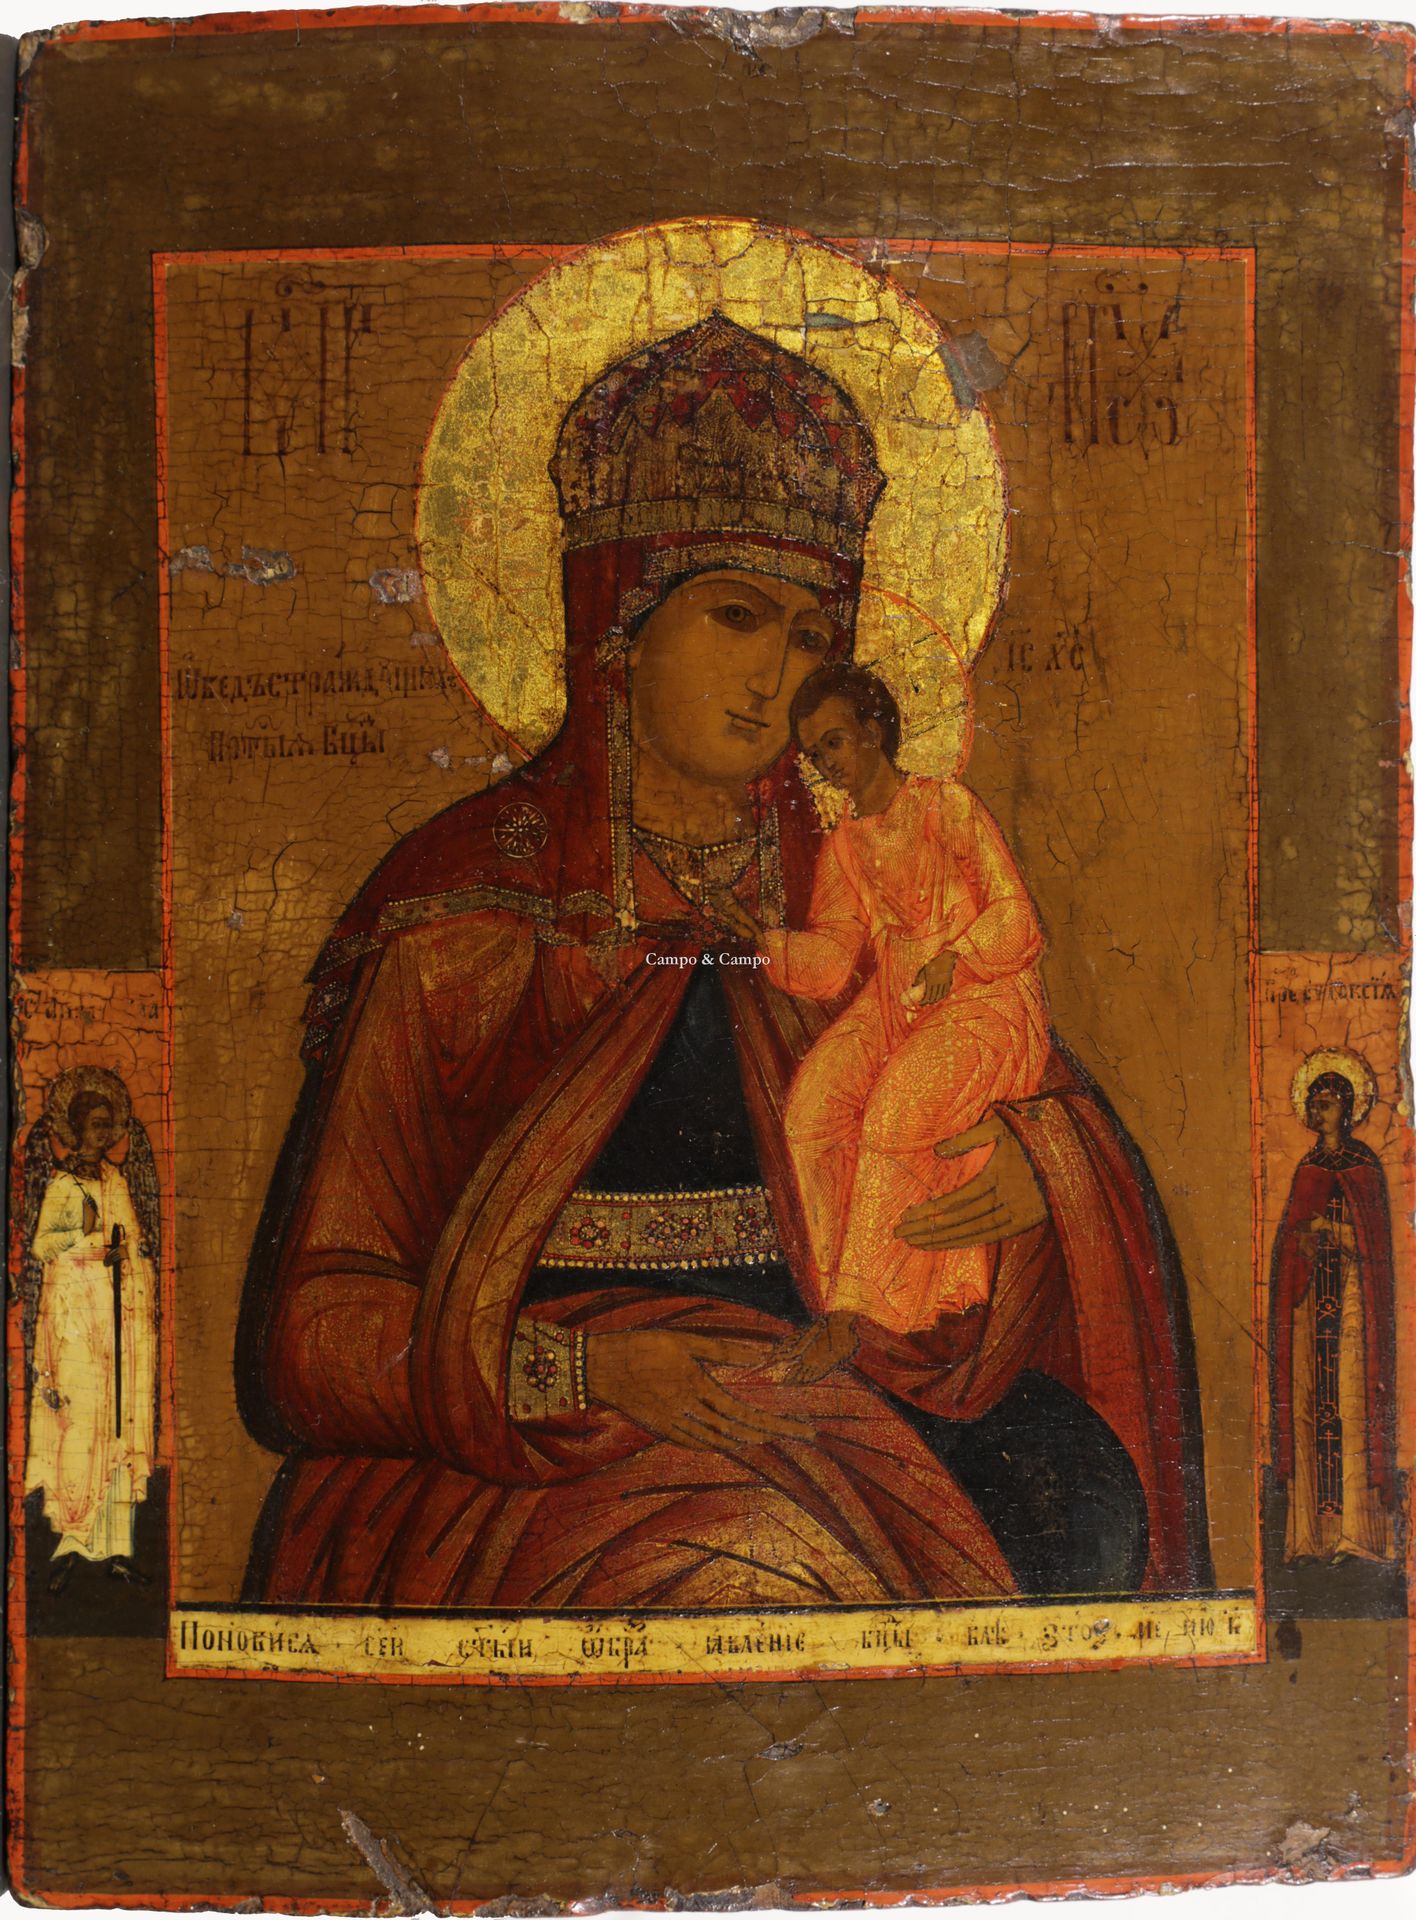 RUSSISCH ICOON Russian icon representing the Virgin and Child
Russisch icoon met&hellip;